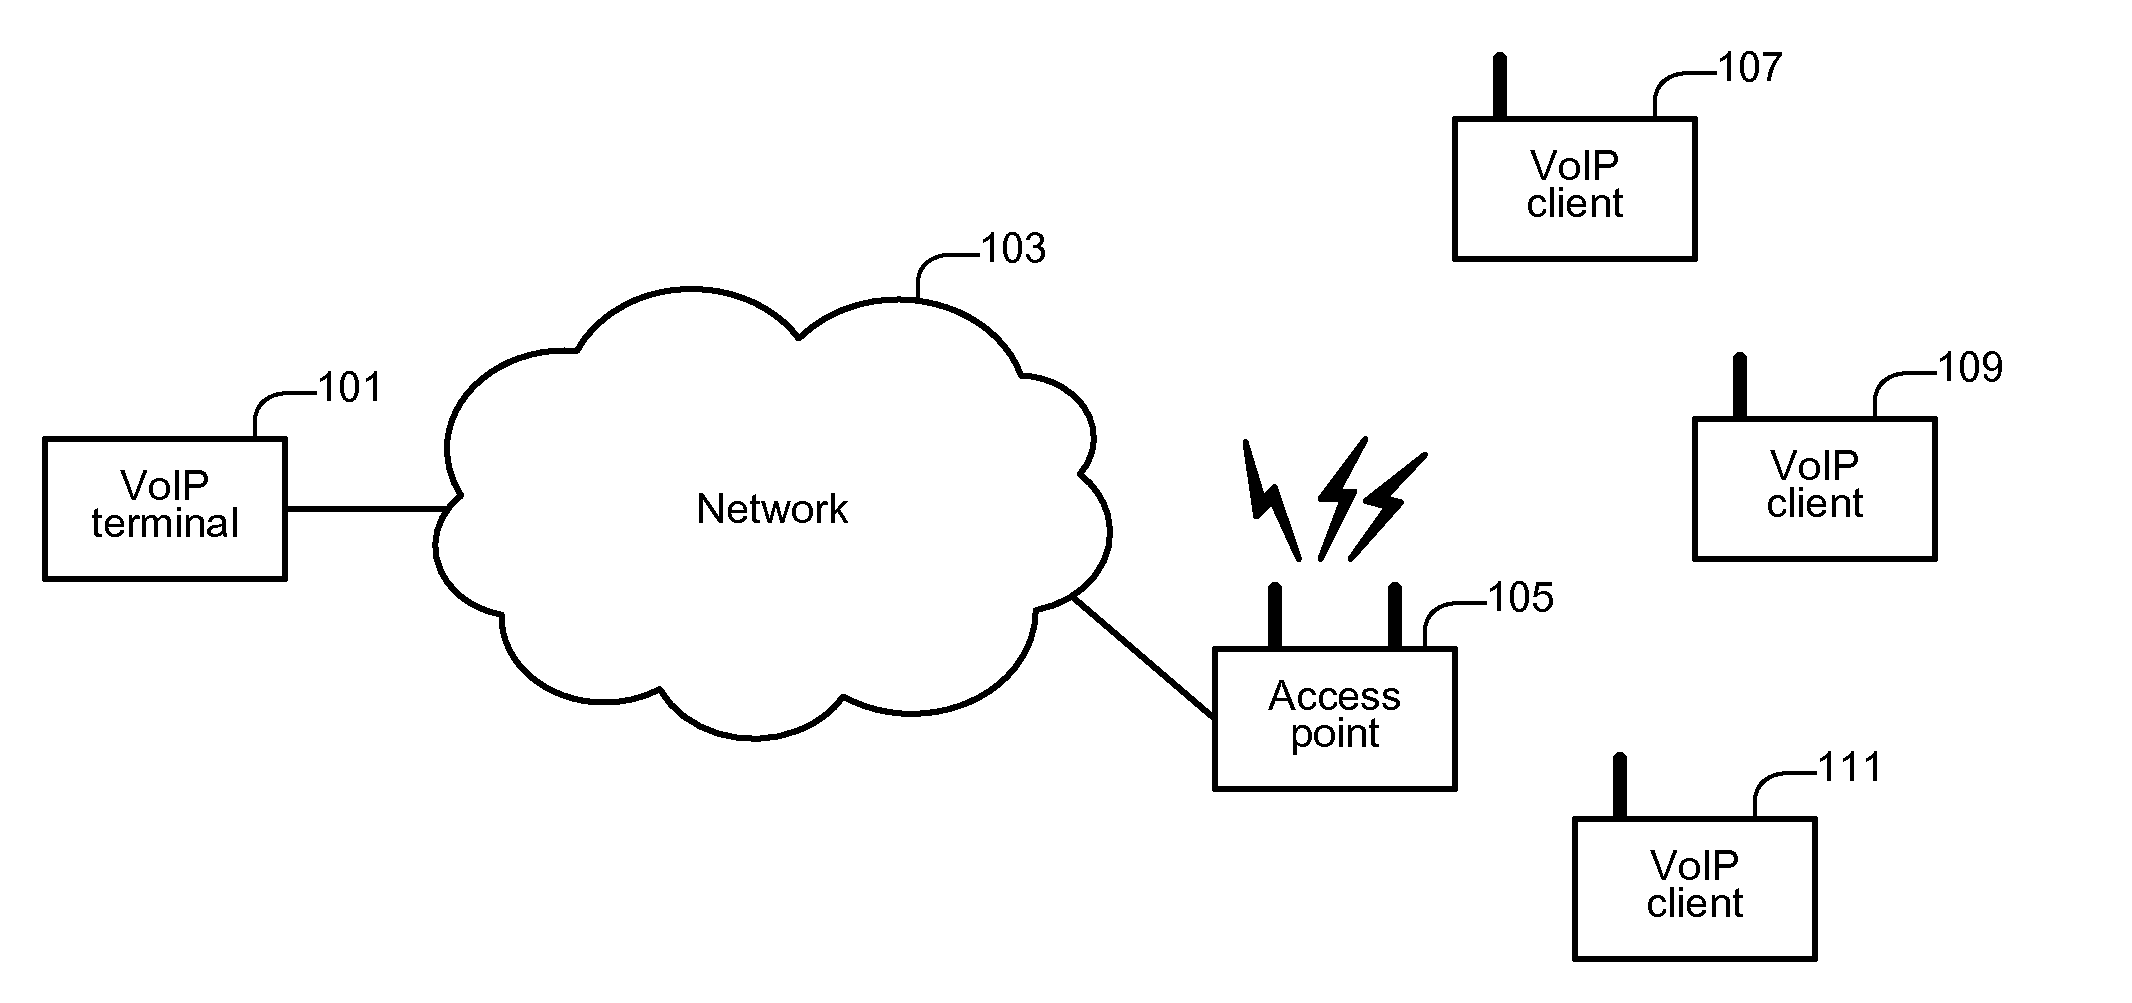 Packet aging in a wireless network